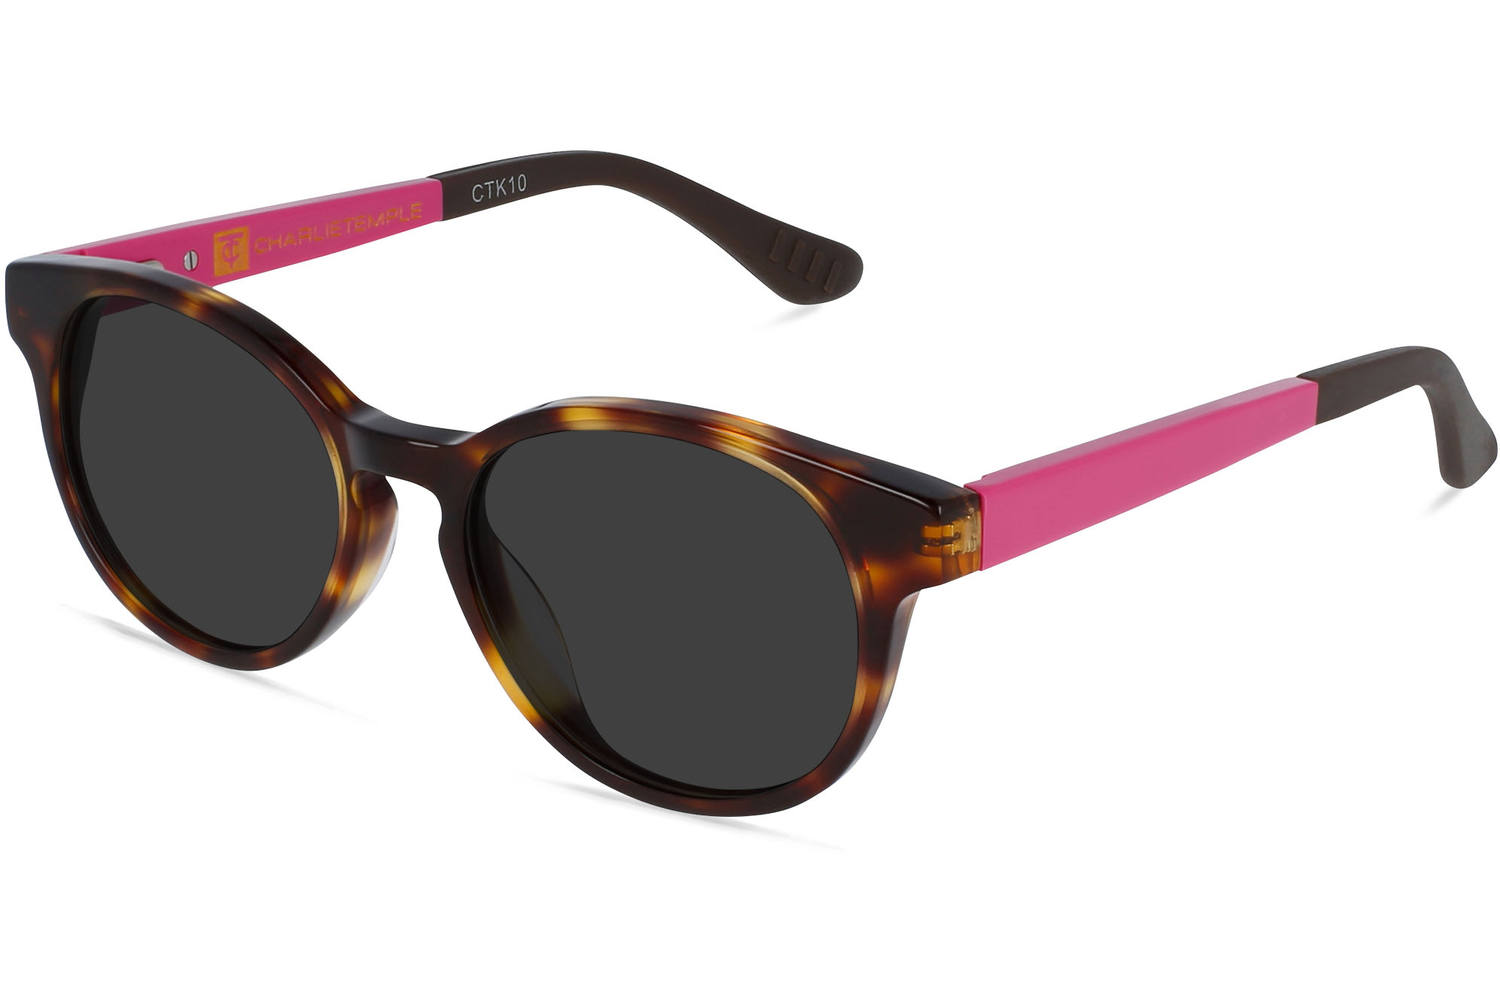 Bobby Small | Spice Tortoise meets Dahlia Pink - 1